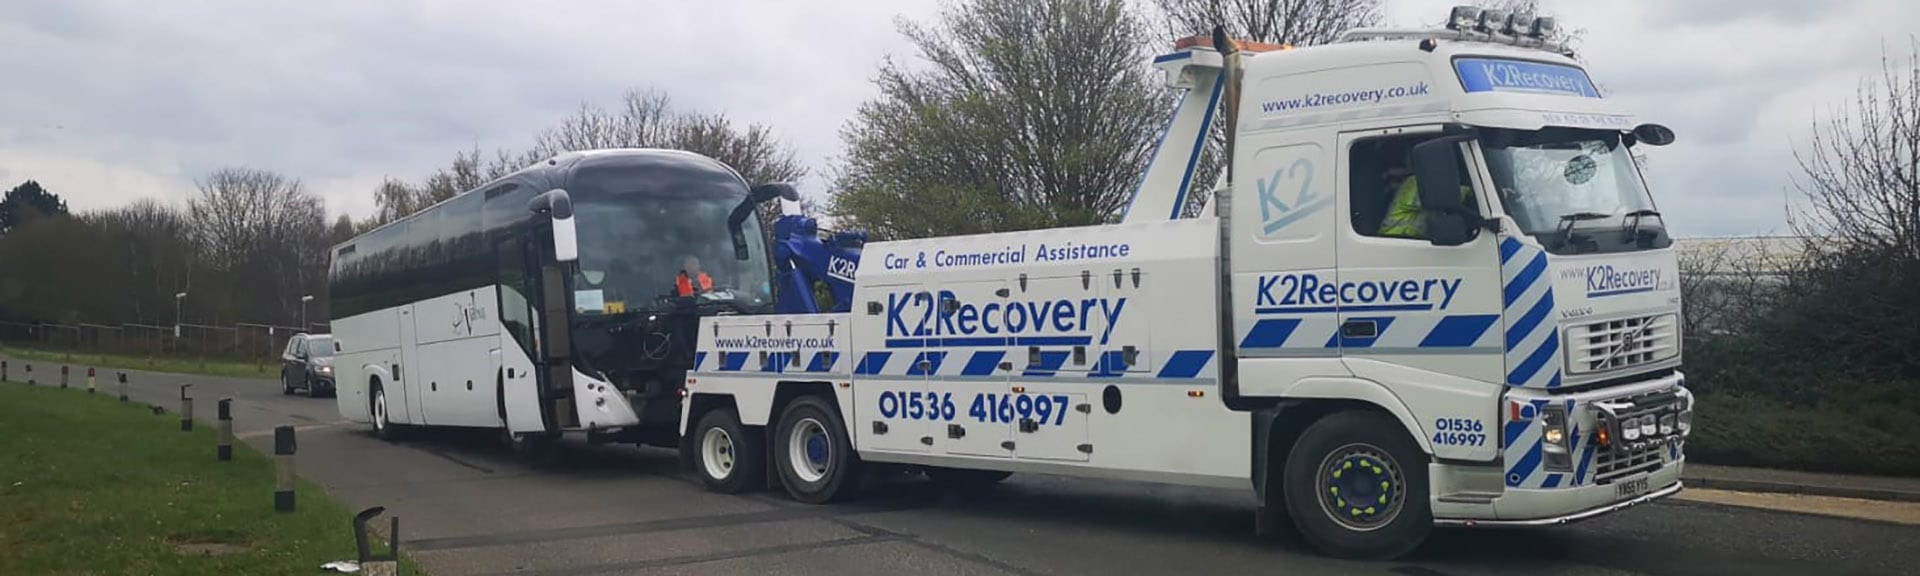 Roadworks Recovery - K2 recovery